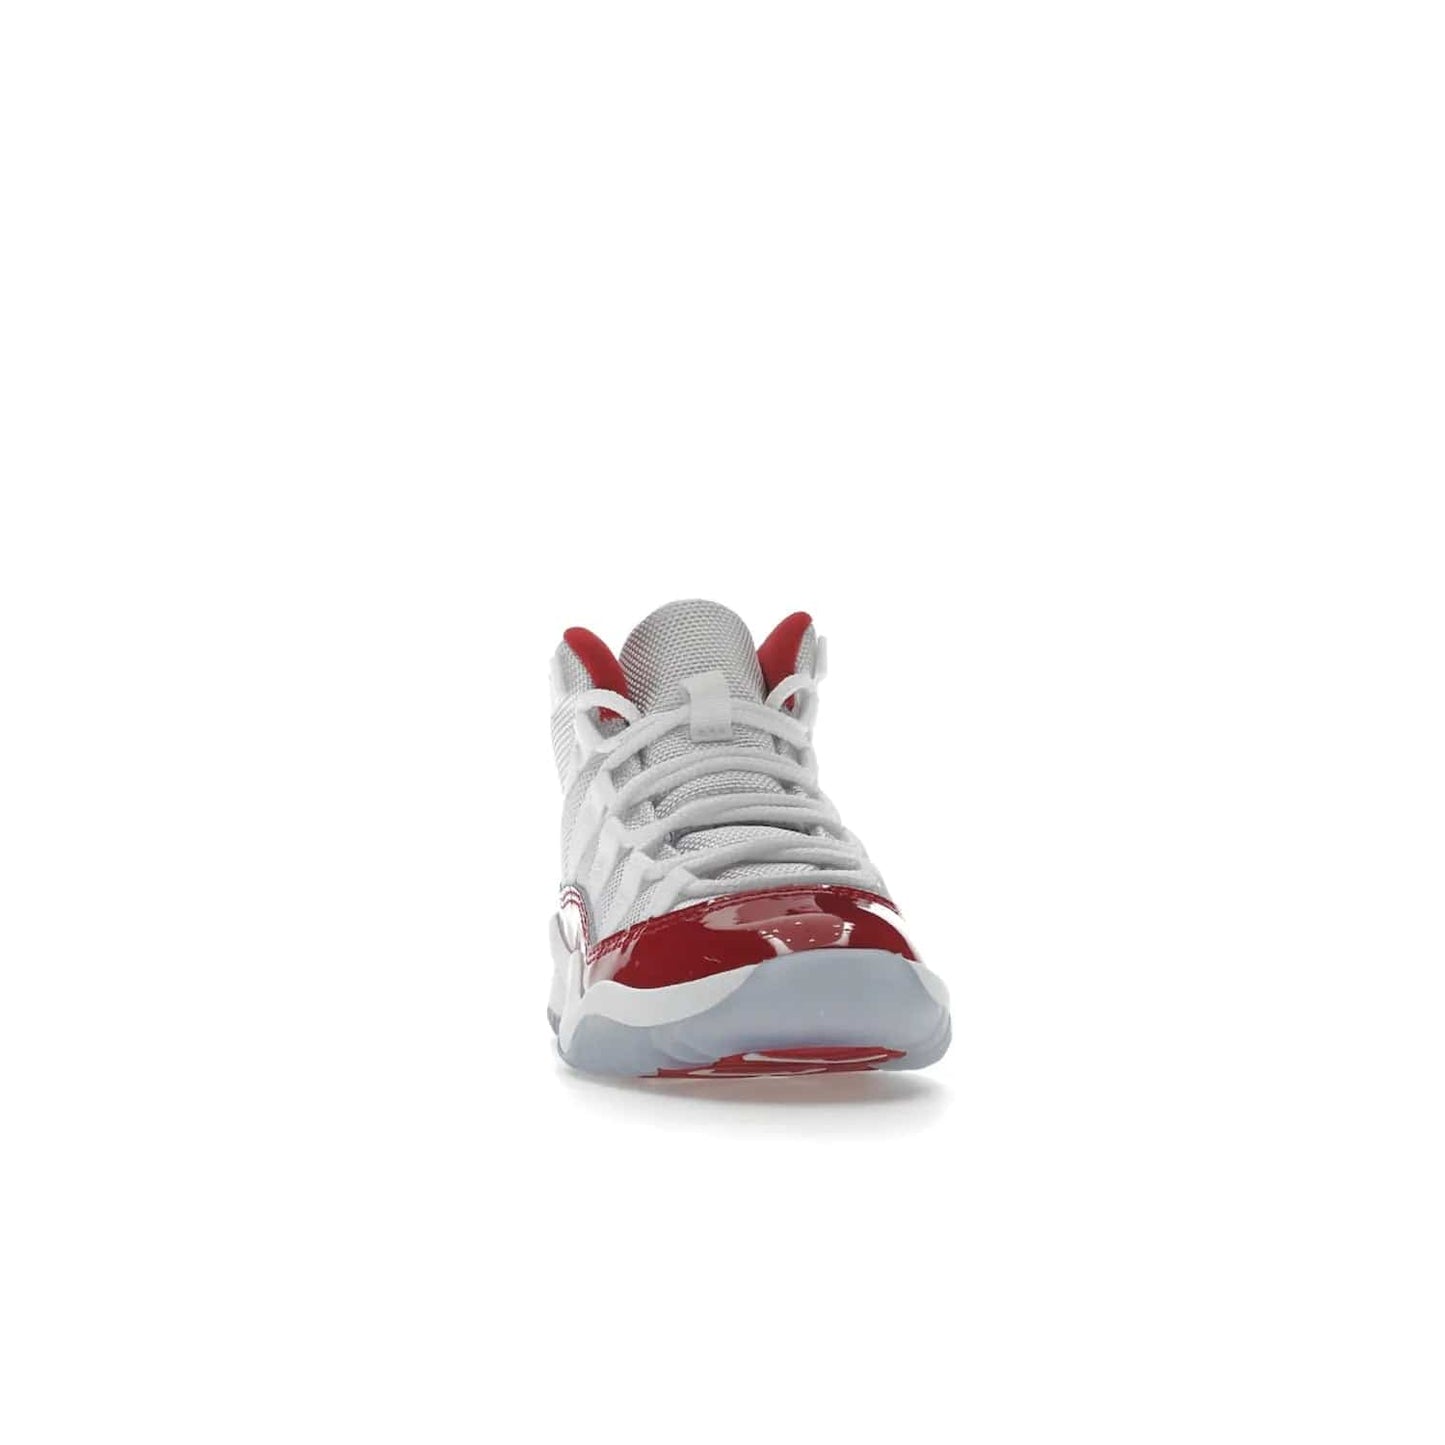 Jordan 11 Retro Cherry (2022) (PS) - Image 9 - Only at www.BallersClubKickz.com - An iconic silhouette with a timeless look, the Air Jordan 11 Retro Cherry 2022 PS features a crisp White, Varsity Red and Black colorway. The upper is made of ballistic mesh, a red patent leather mudguard, '23' branding and white Phylon midsole. Get optimal cushioning and comfort on December 10th, 2022. Don't miss out.